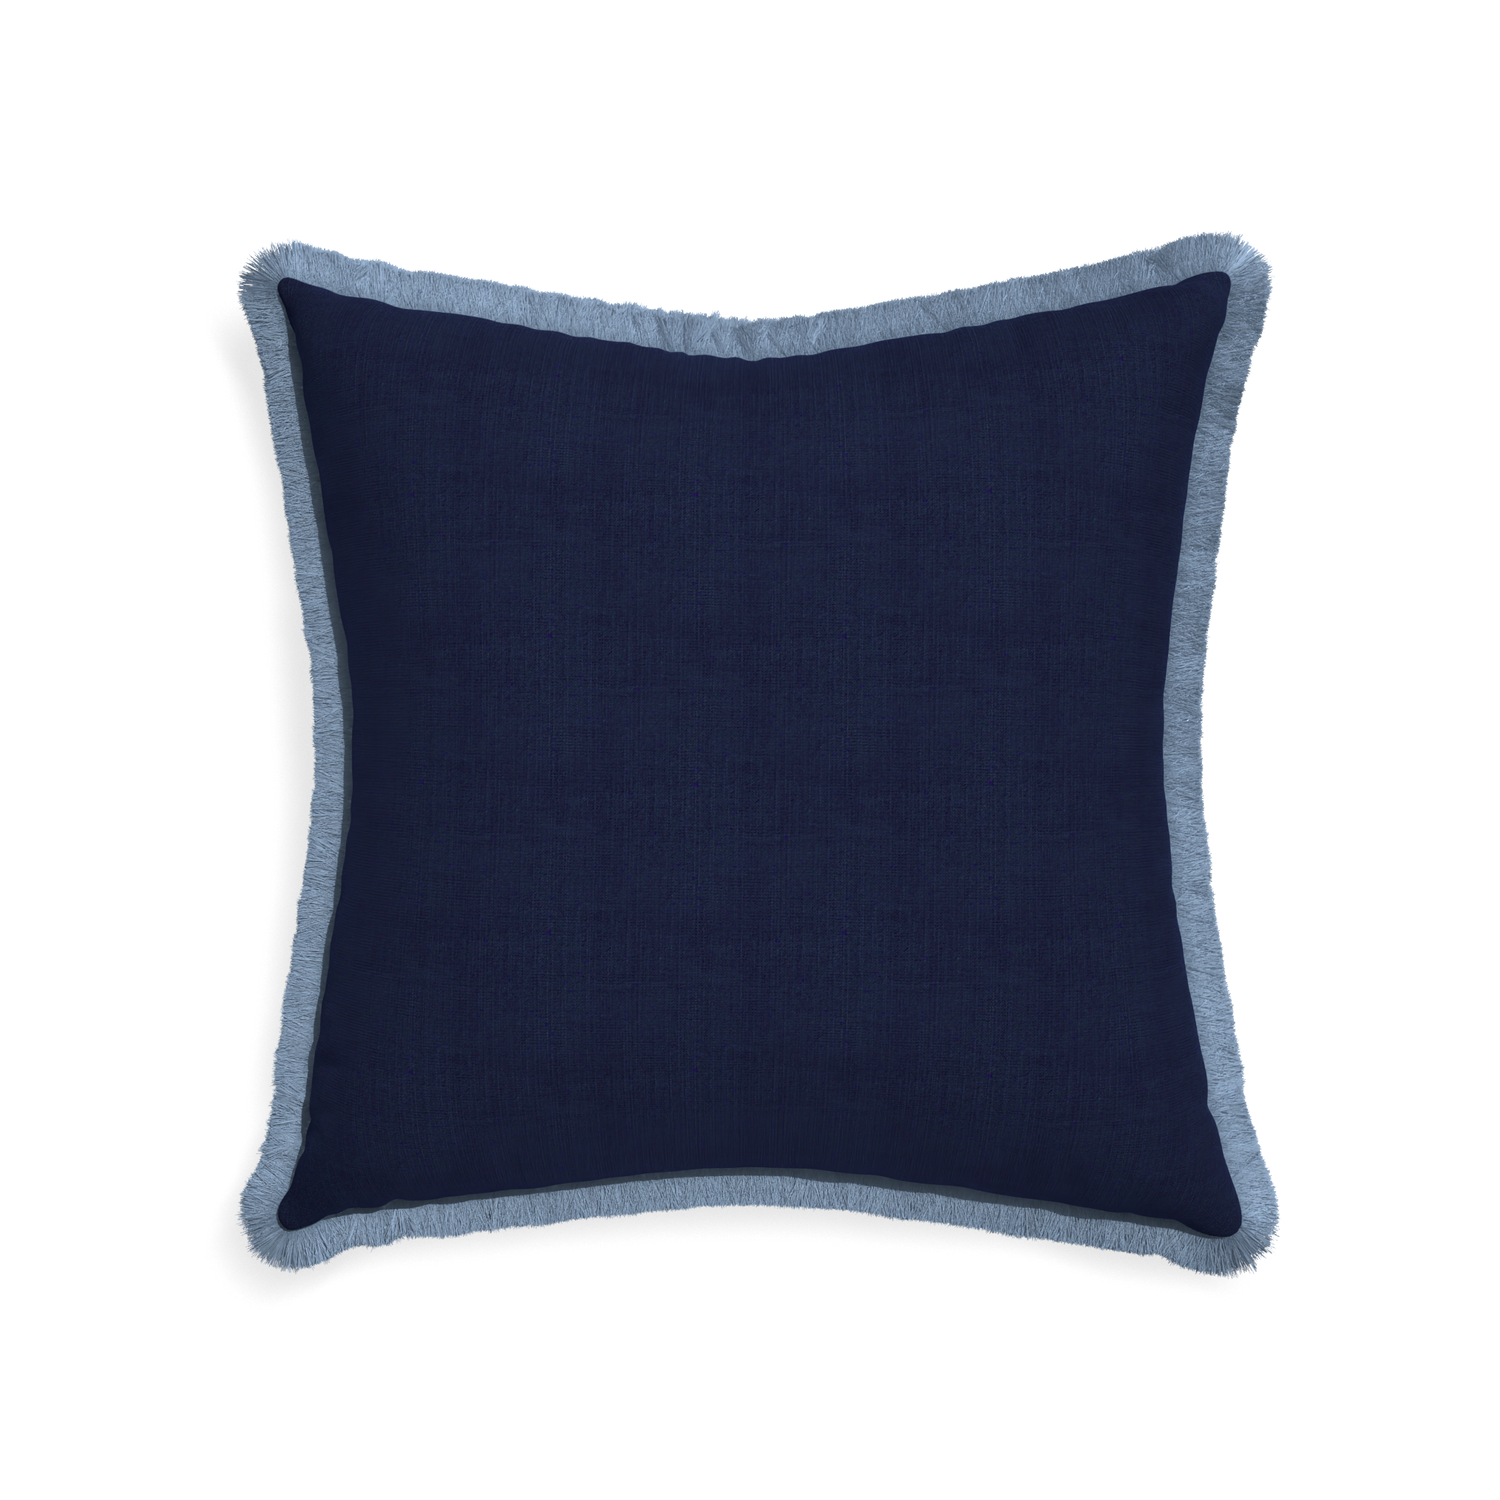 22-square midnight custom pillow with sky fringe on white background